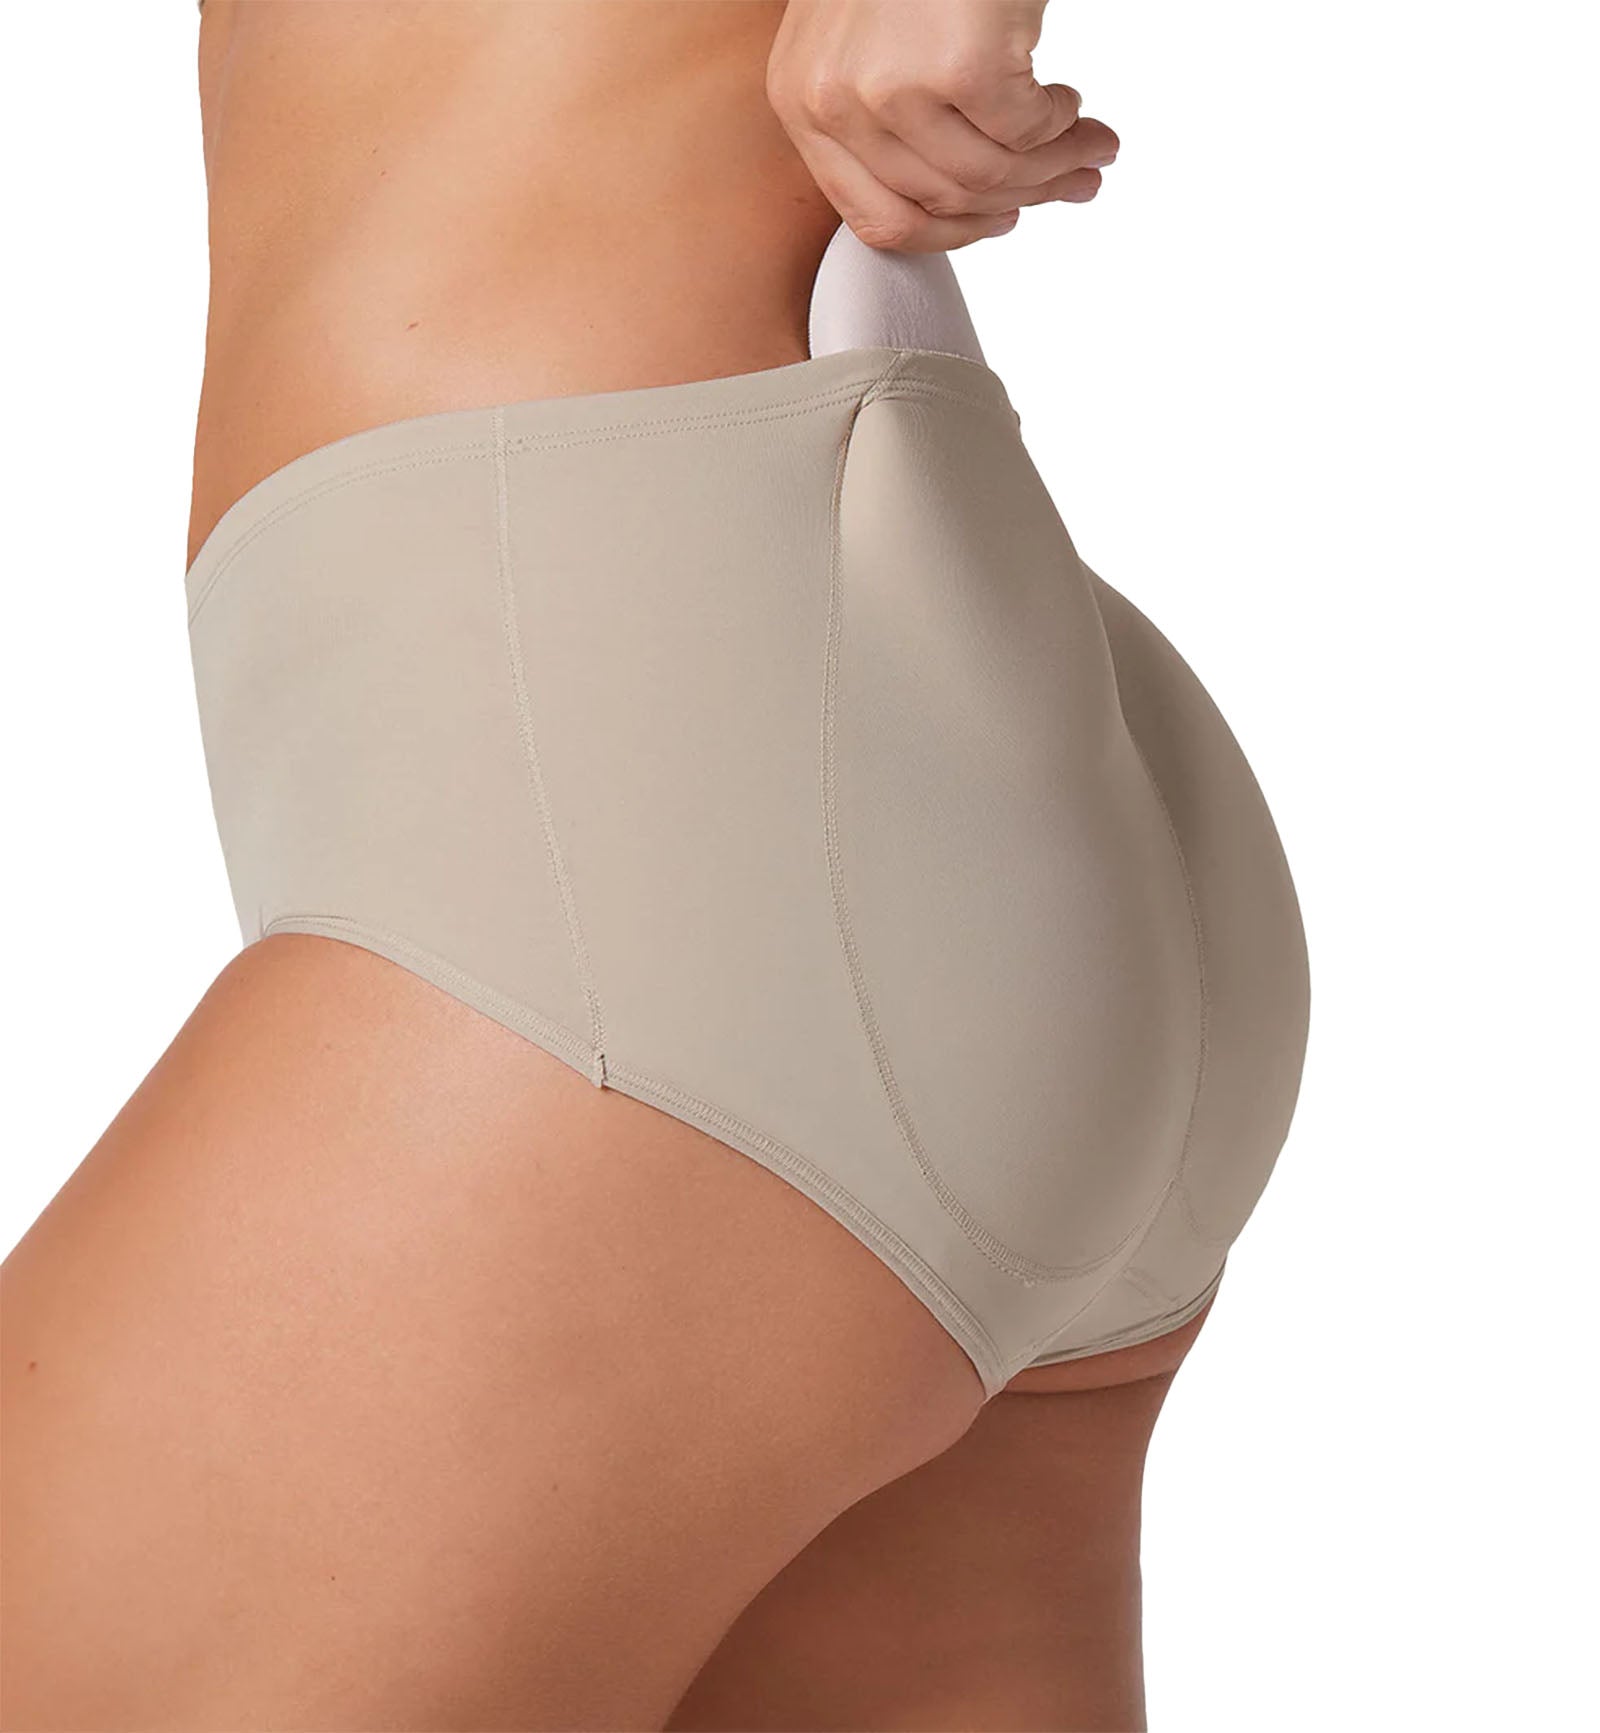 Leonisa Magic Instant Butt Lift Padded Panty (012688),Small,Nude - Nude,Small